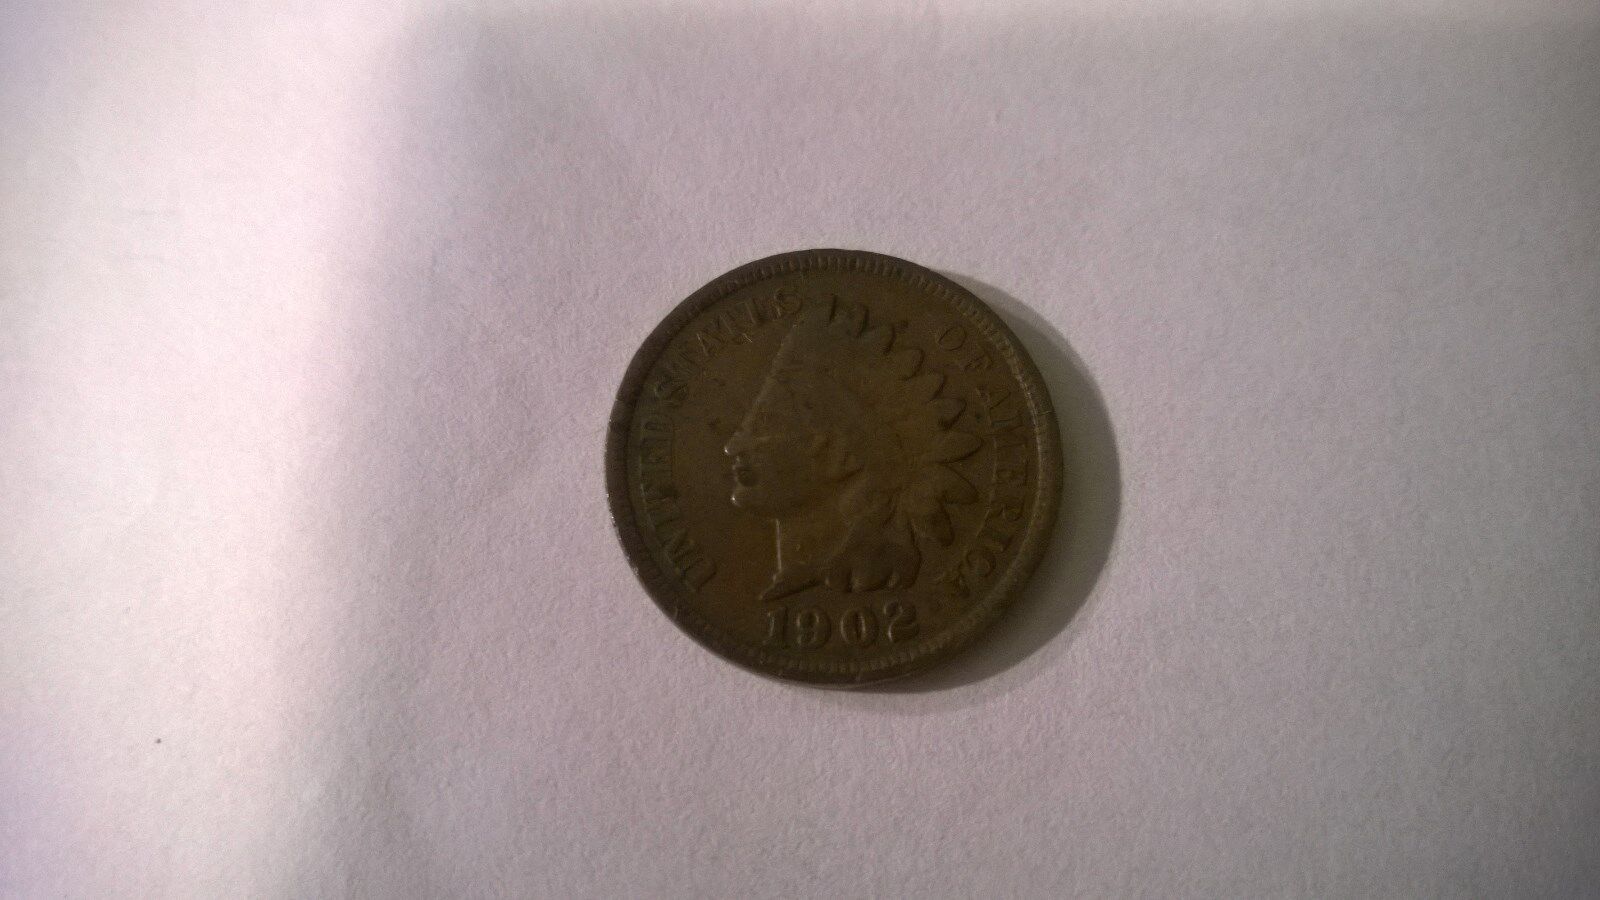 1902 one cent indian head penny